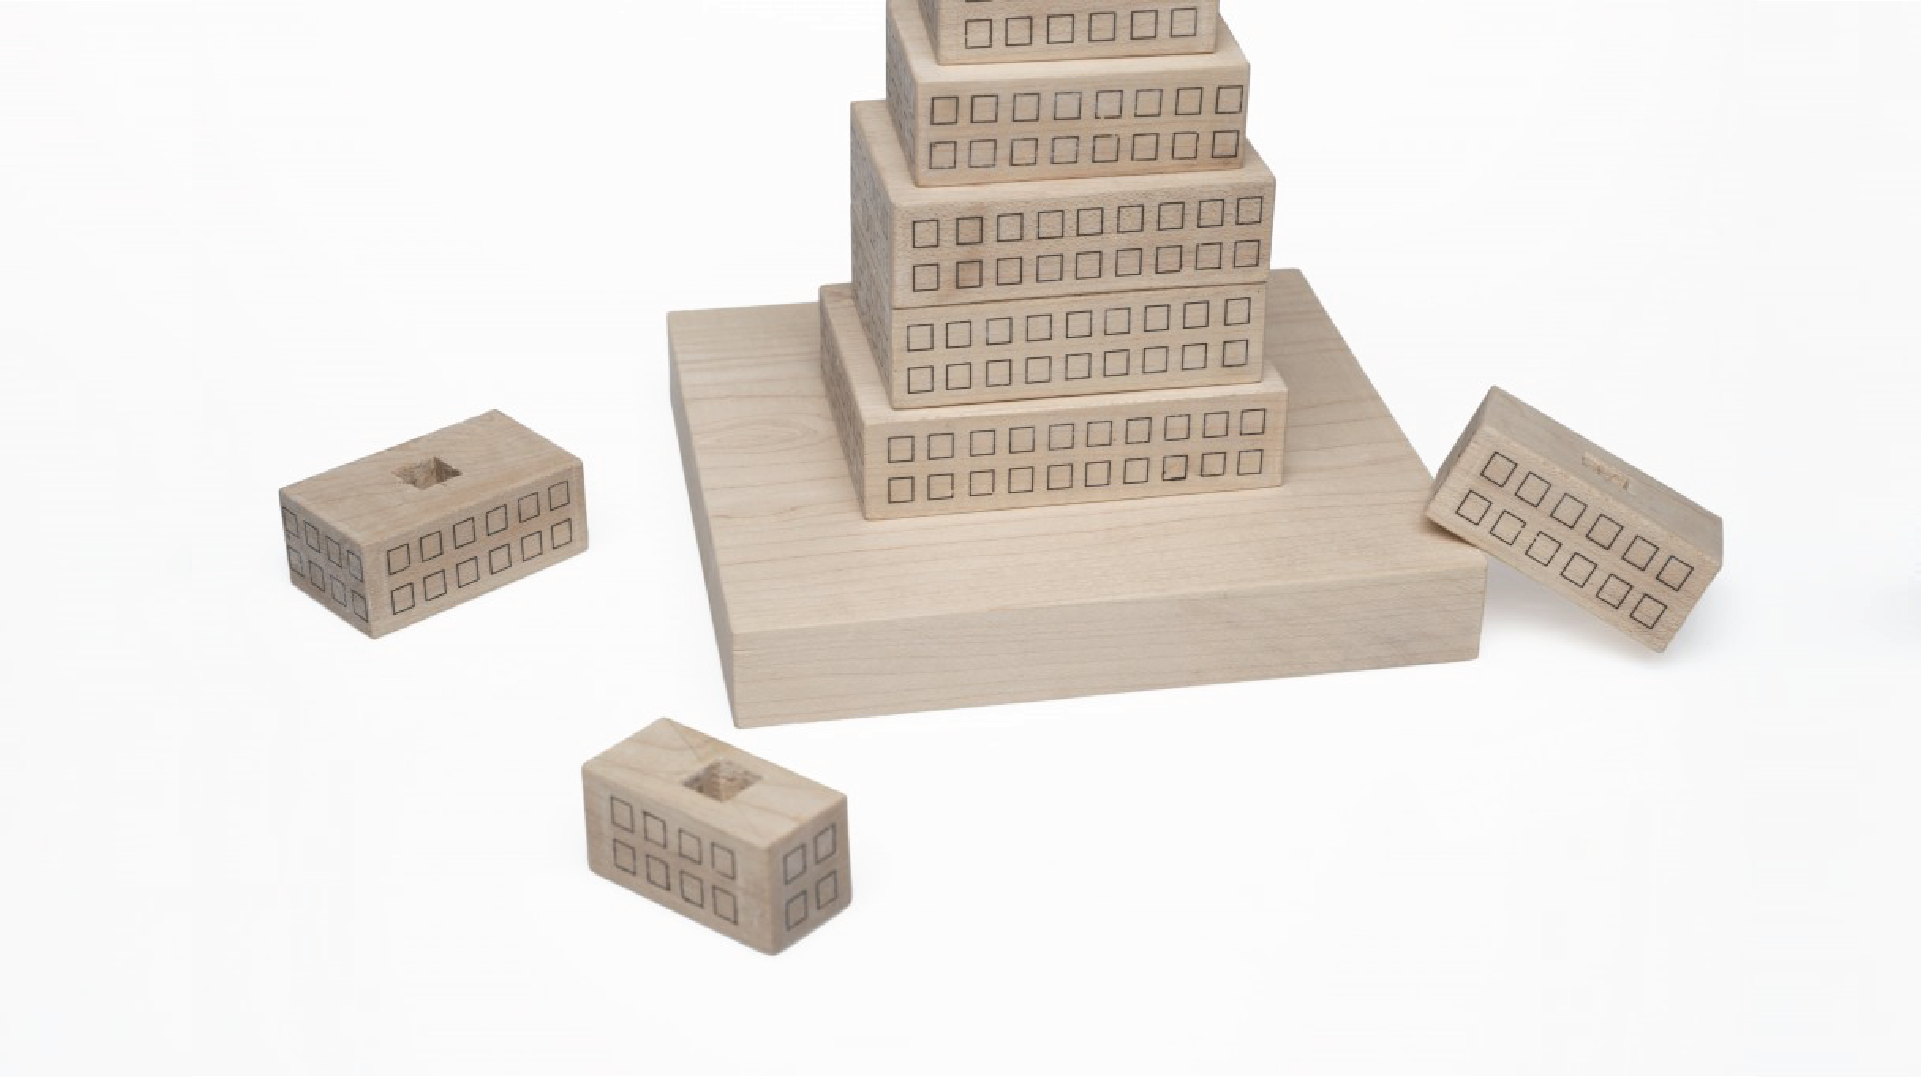 Detail shot of the base of the stacking toy with 3 wood blocks placed on the floor.